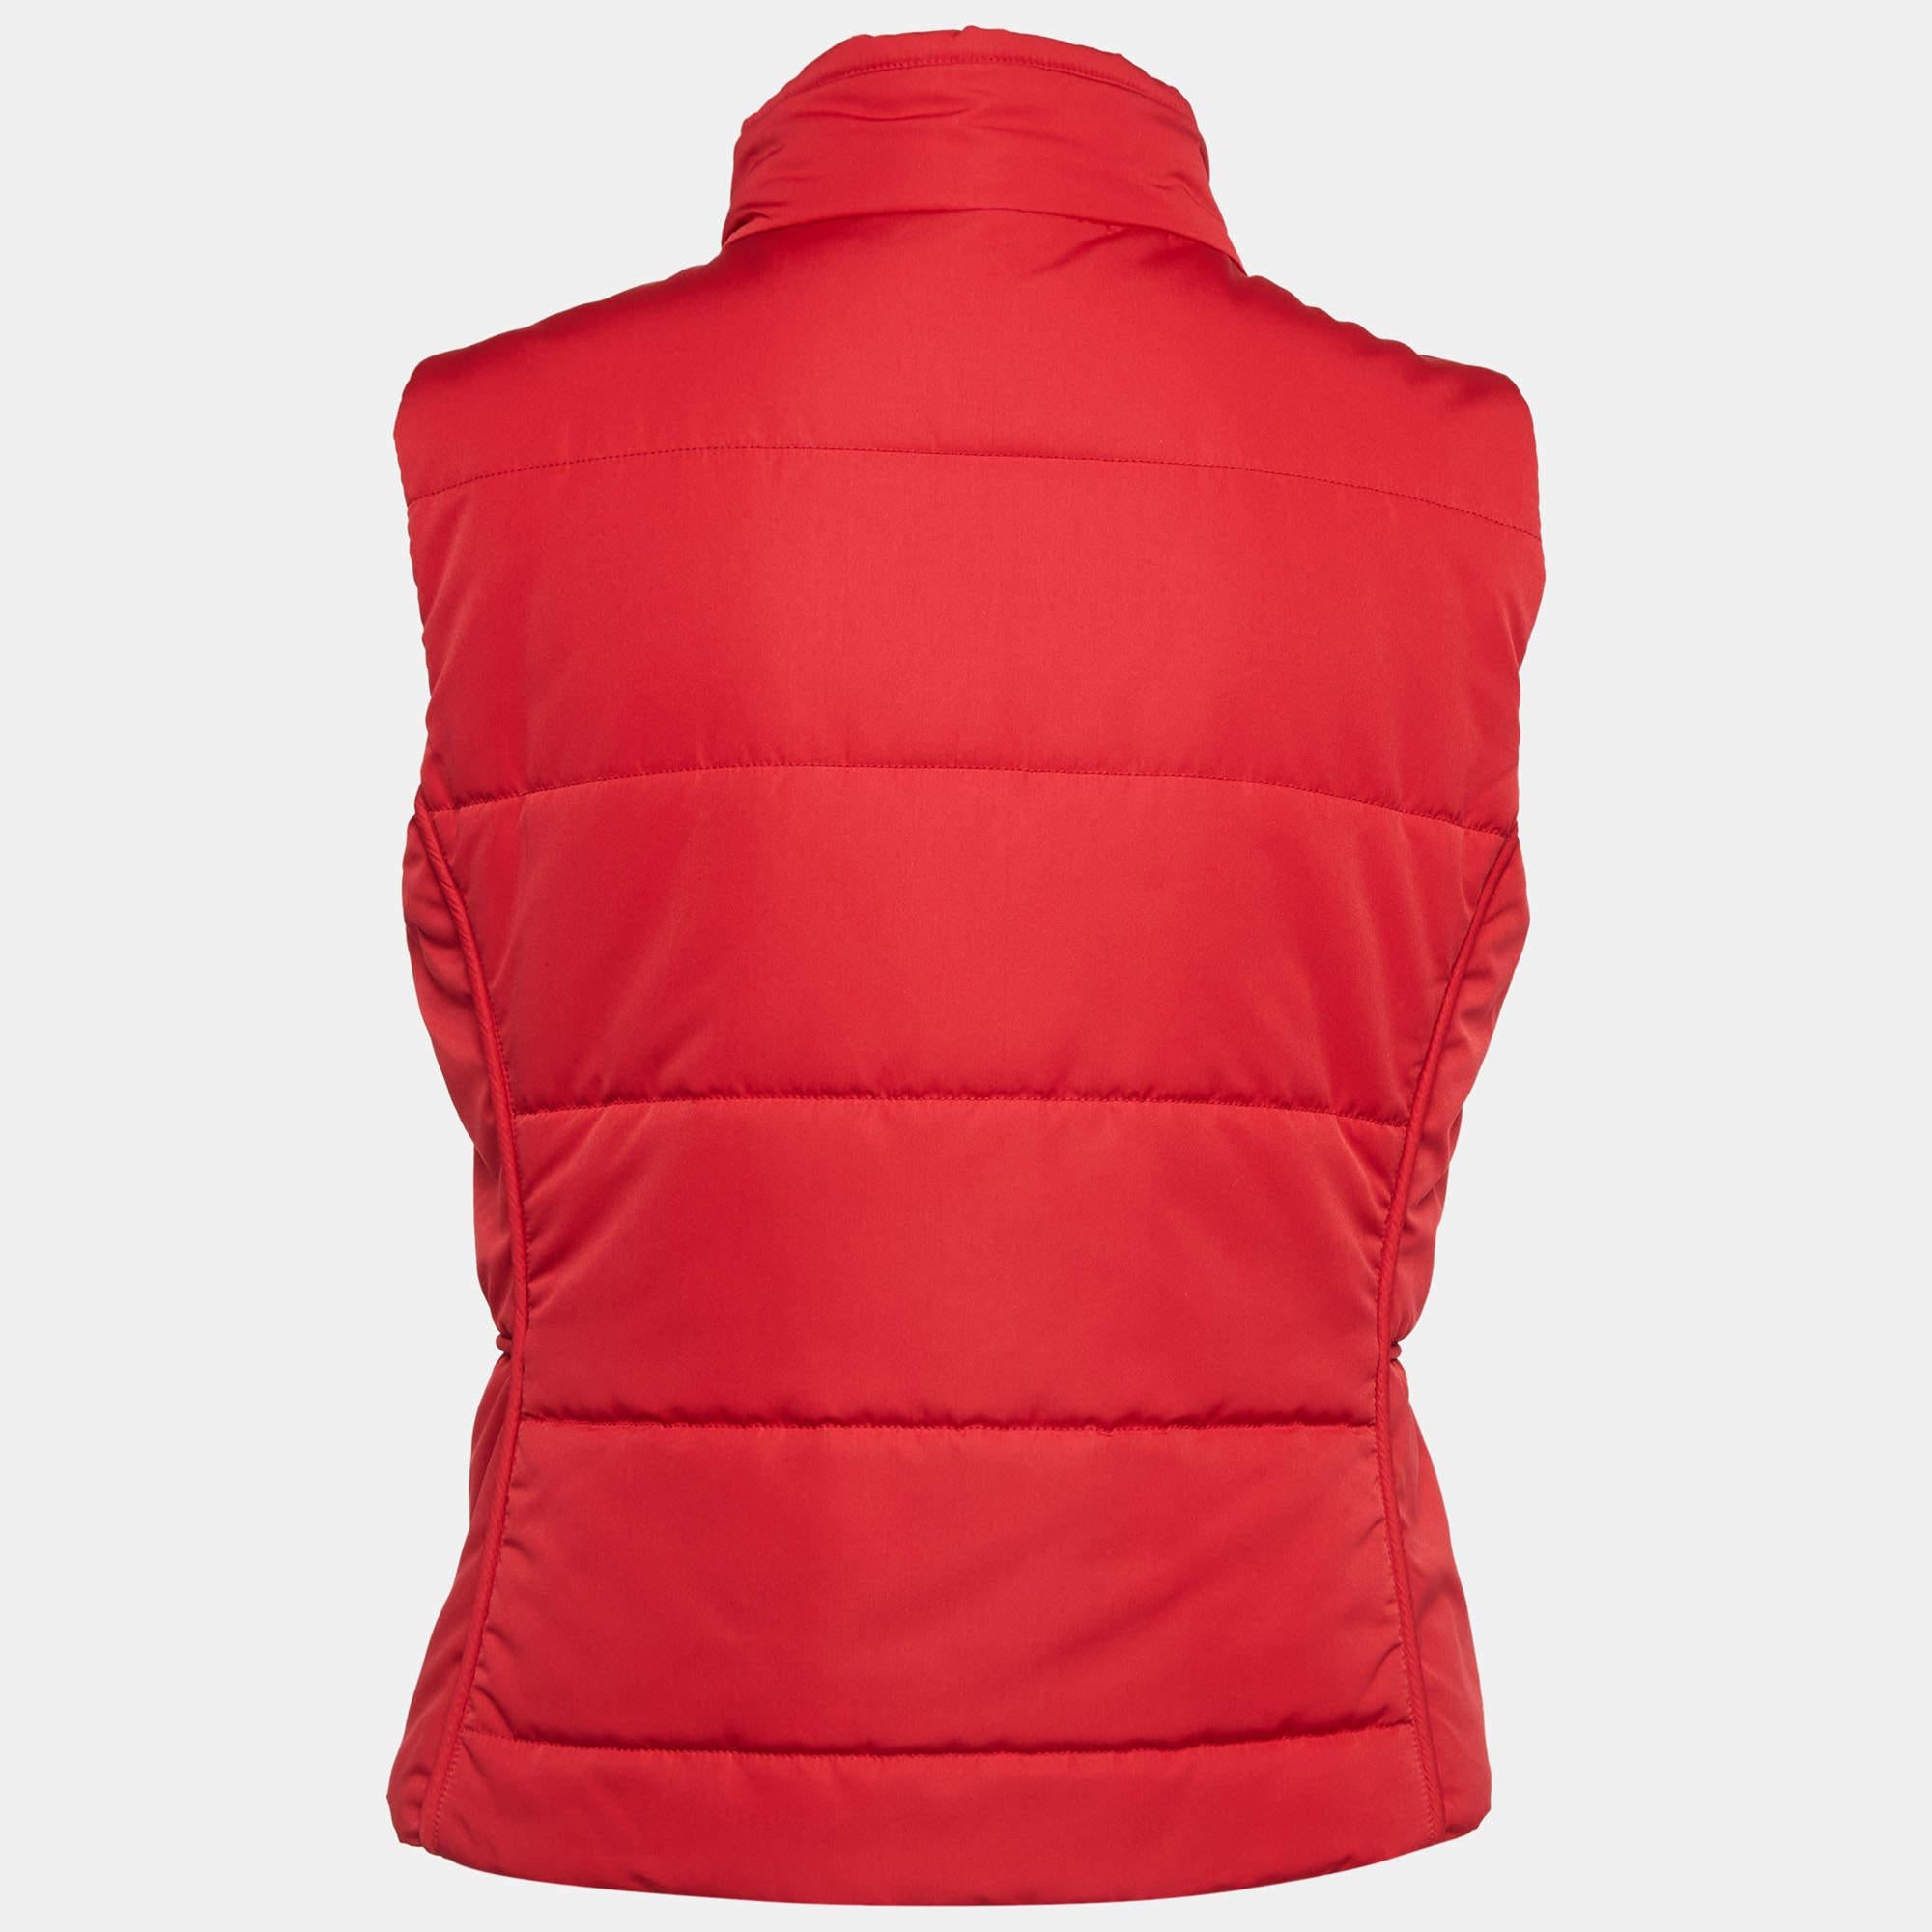 Wrap yourself in the refined luxury of the Hermès vest. Crafted with precision and finesse, this vest boasts a sleek silhouette and quilted design. Its vibrant red hue adds a pop of color to any ensemble, while the sleeveless cut offers versatility